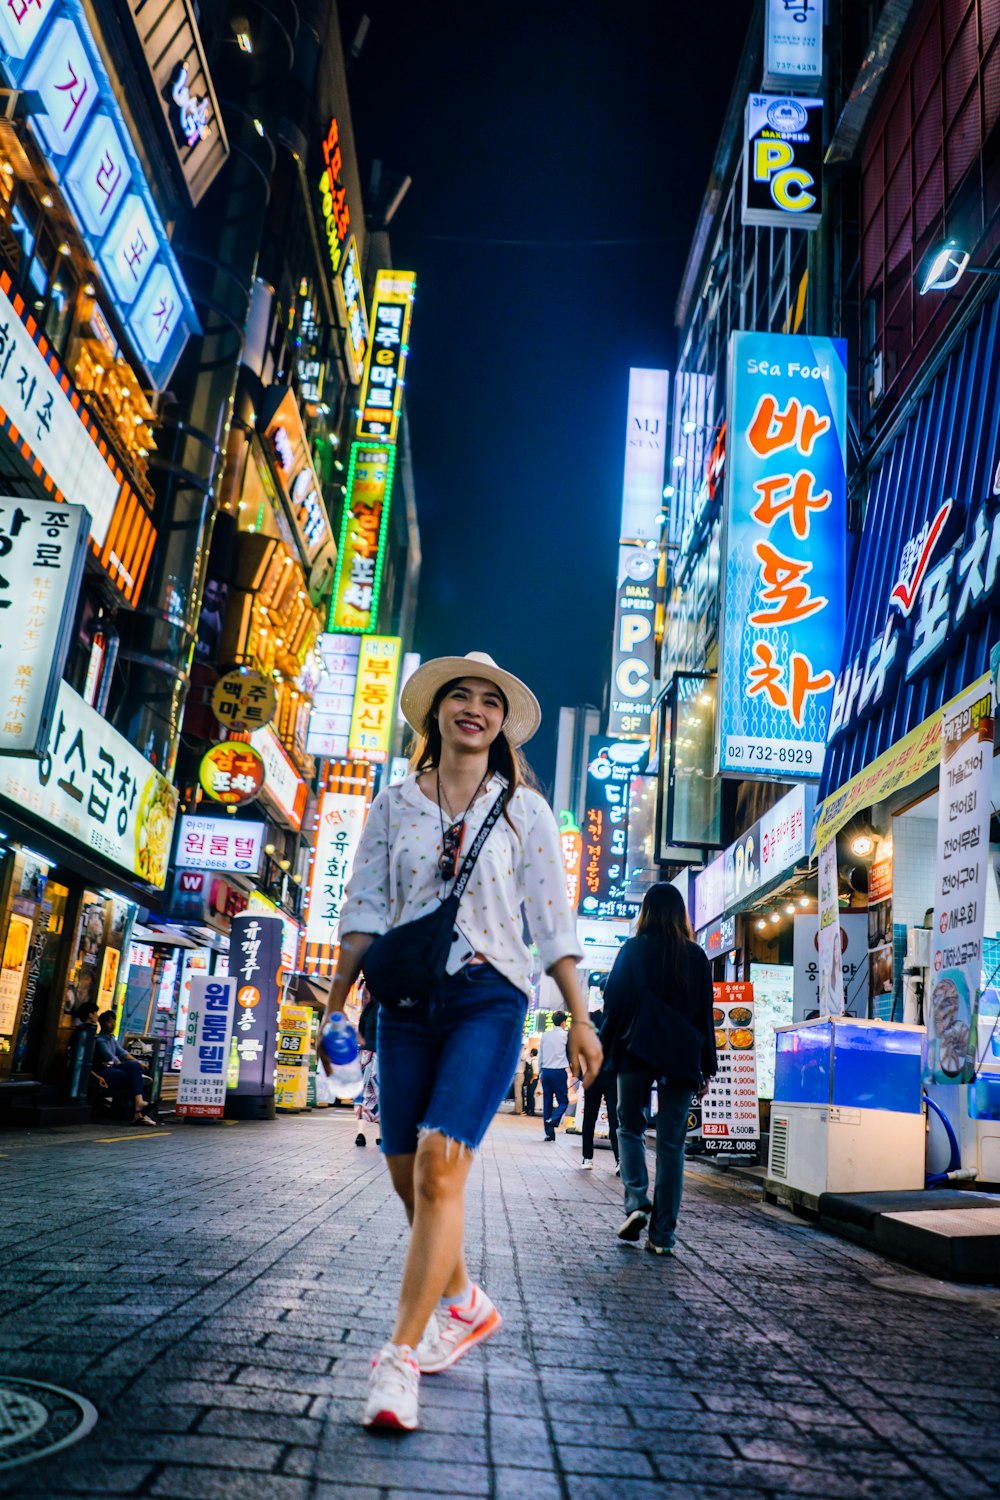 woman walking between buildings with lighted signs at night